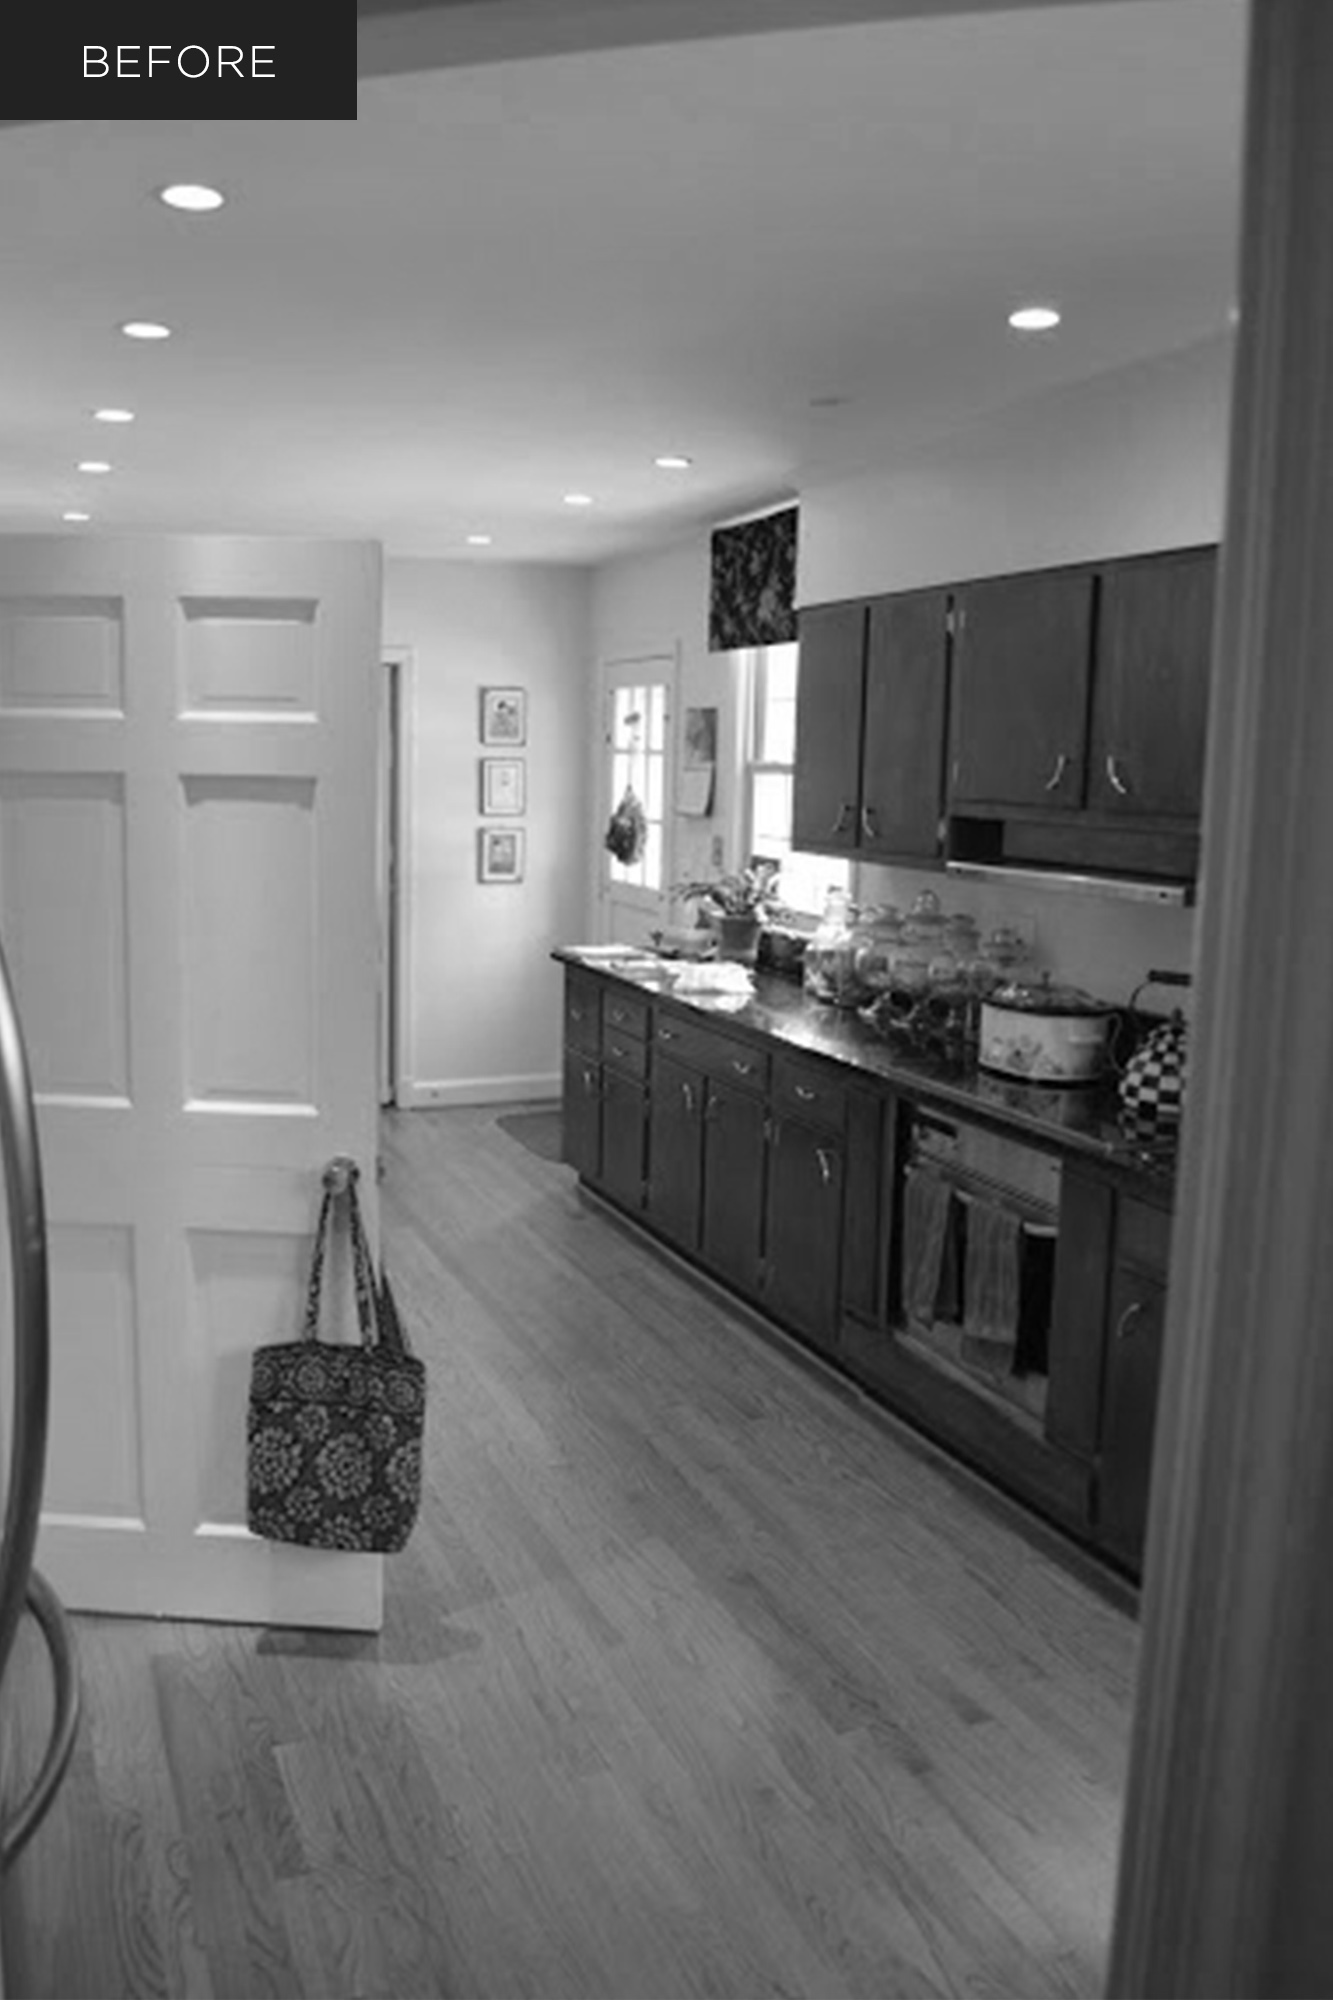 Kitchen before renovation, dark wood cabinetry, crowded galley layout